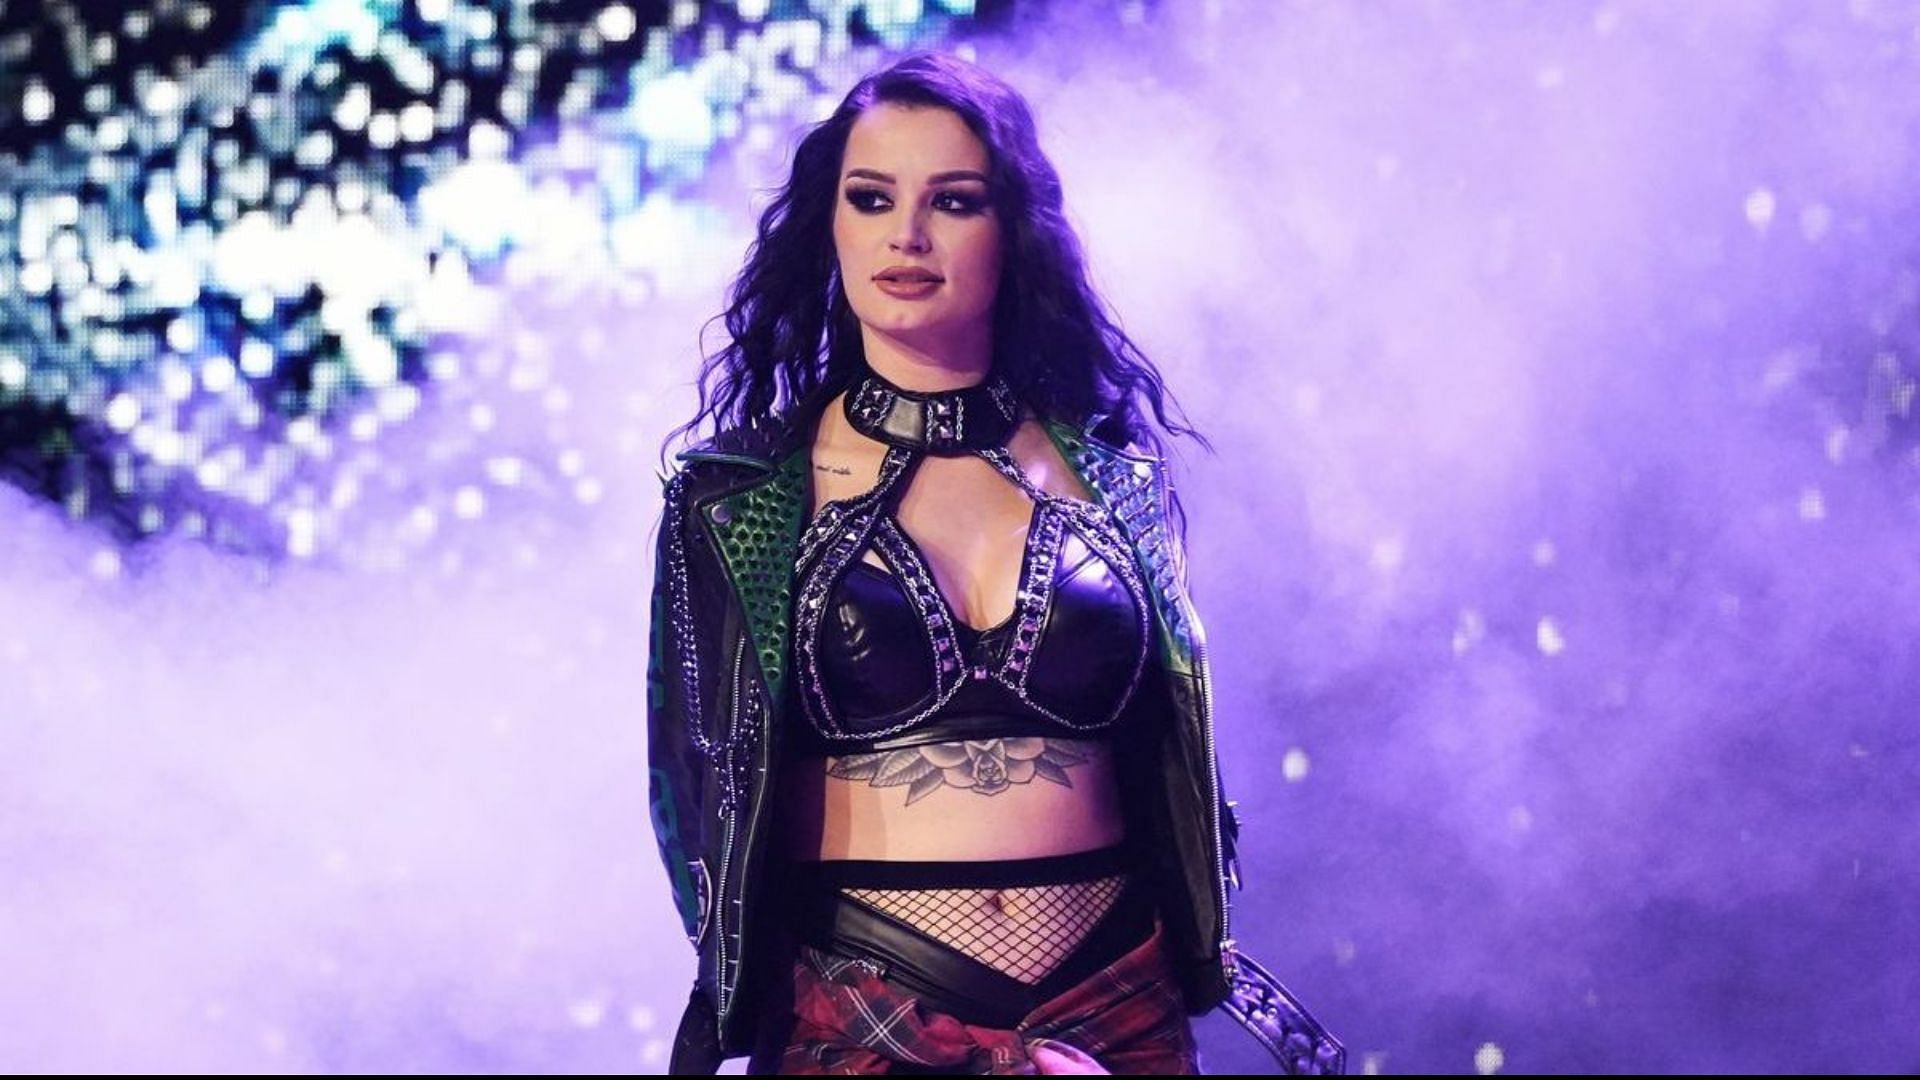 Saraya is a former WWE superstar currently signed with AEW